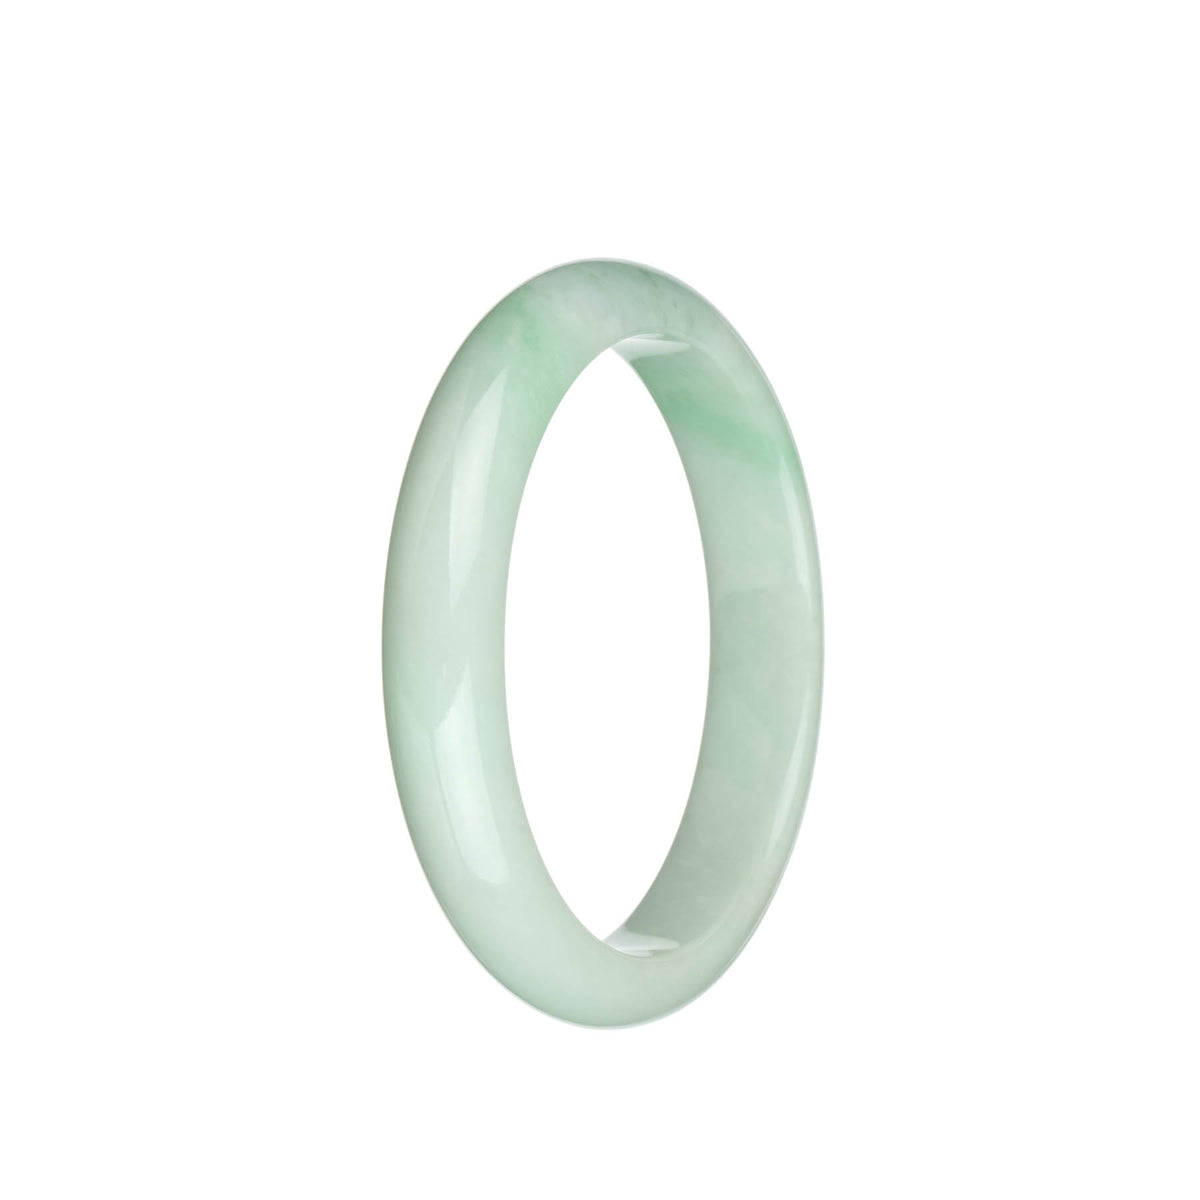 Certified Type A Pale Green with Apple Green patterns and Green Dots Jade Bracelet - 59mm Semi Round